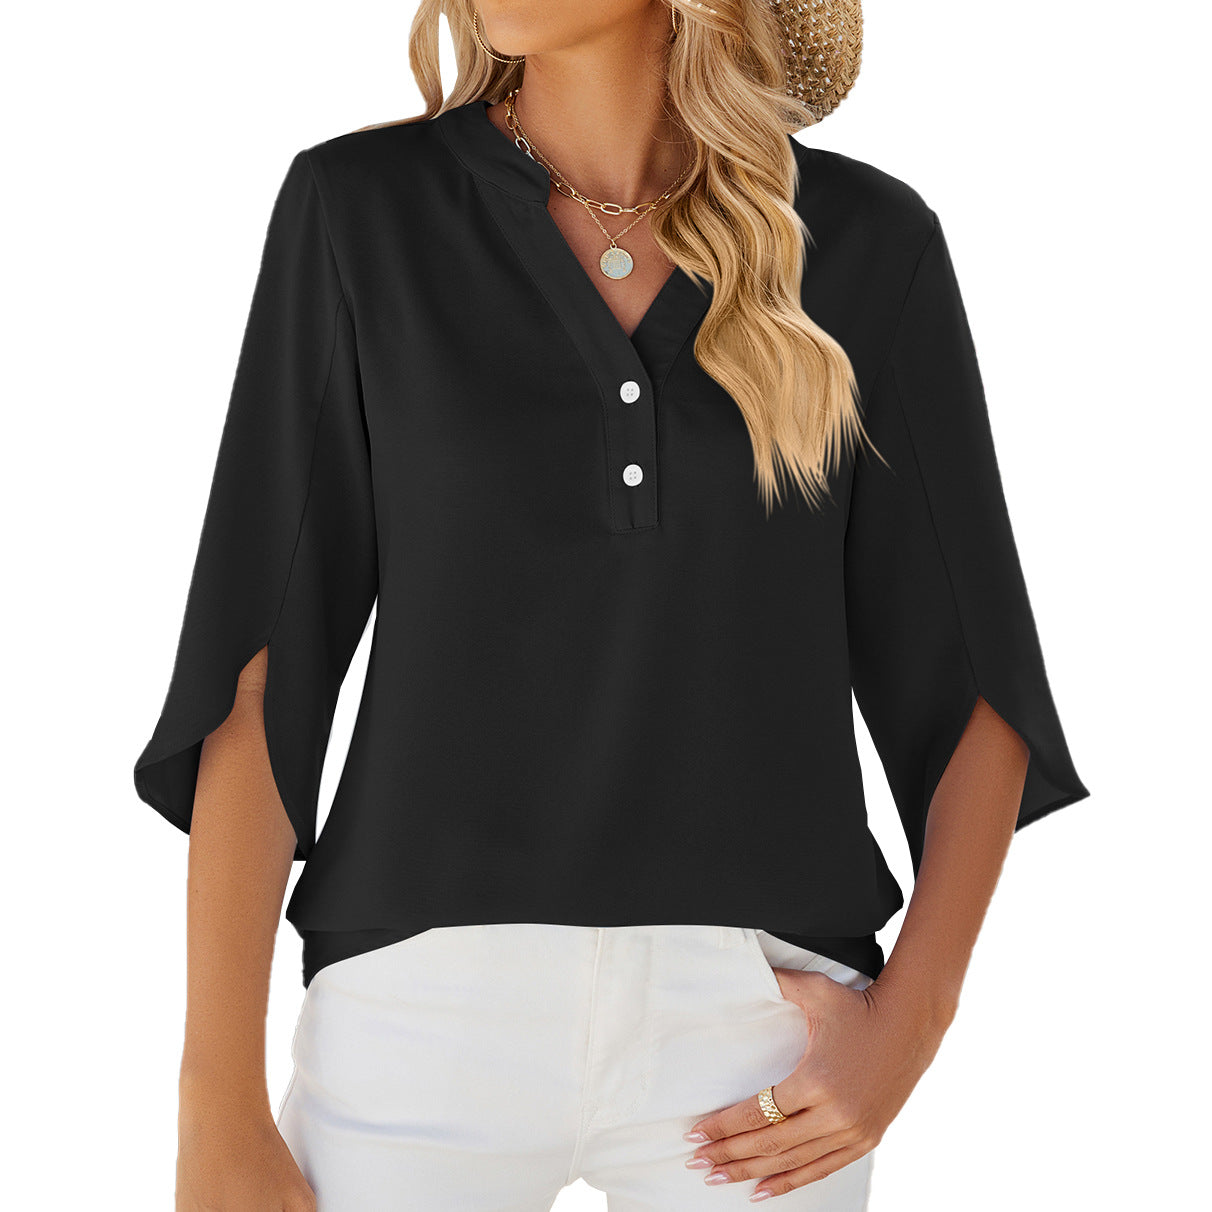 Button V-neck Mid-sleeve Chiffon Shirt Women's Solid Color Top